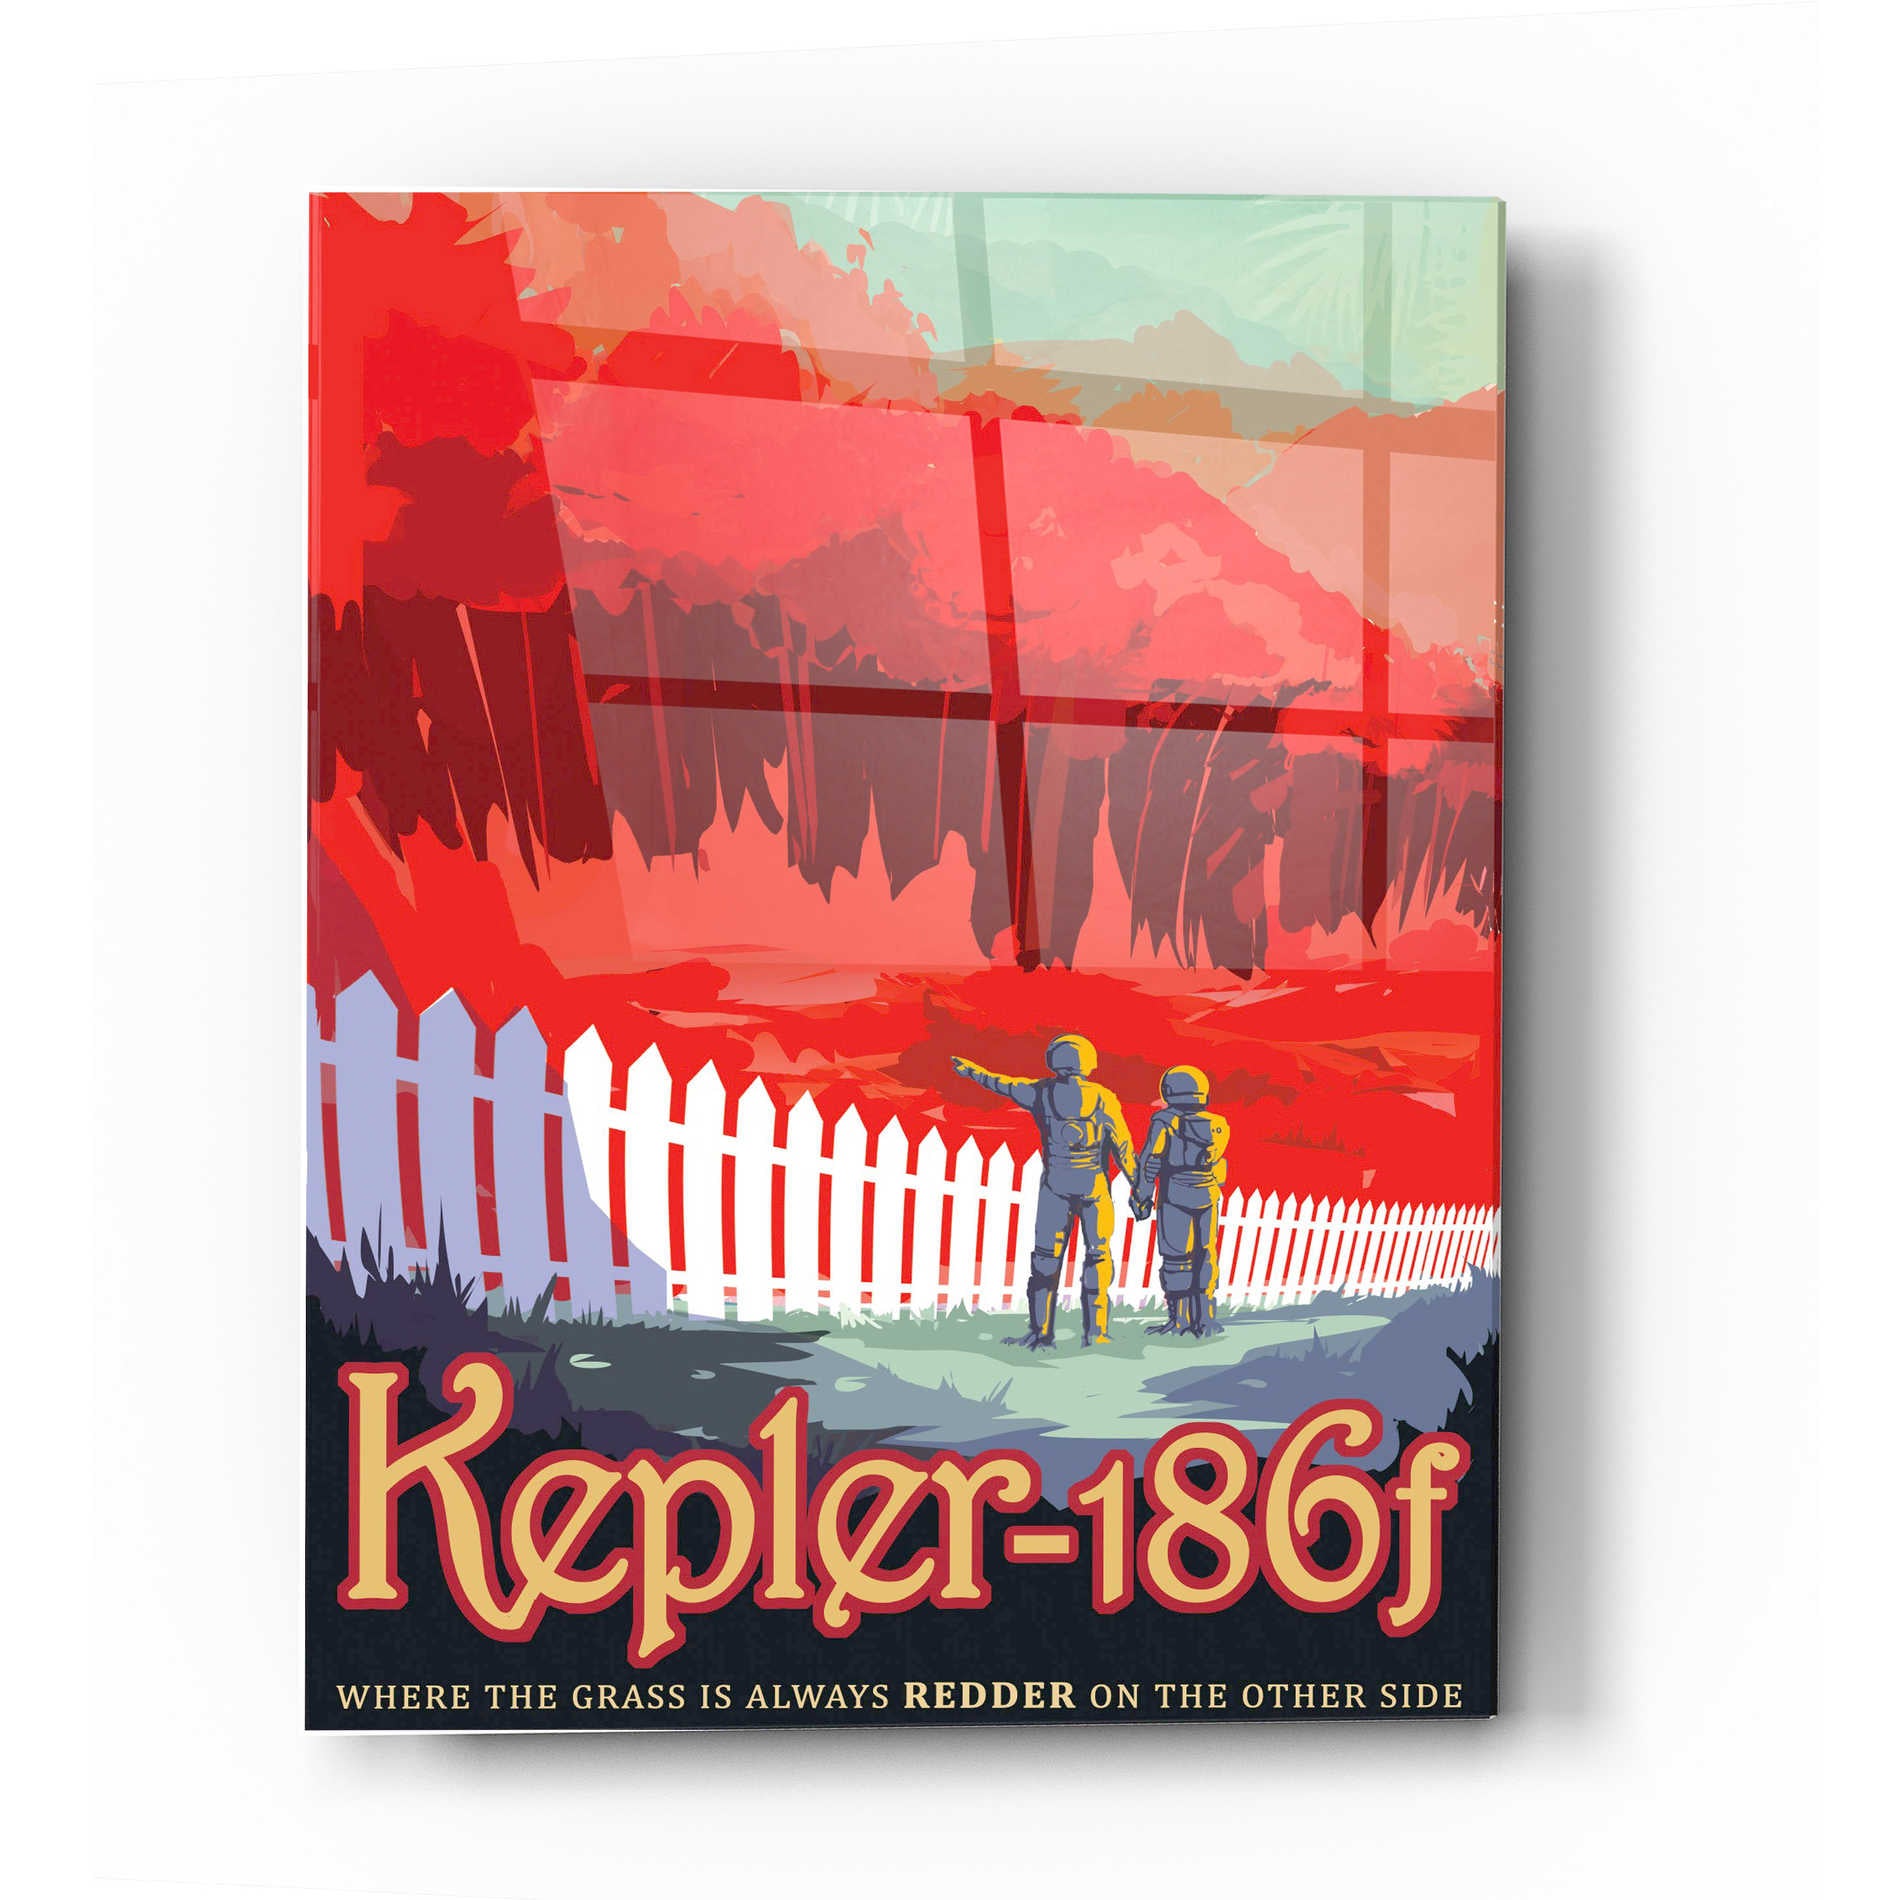 Epic Art 'Visions of the Future: Kepler-186f' Acrylic Glass Wall Art,12x16